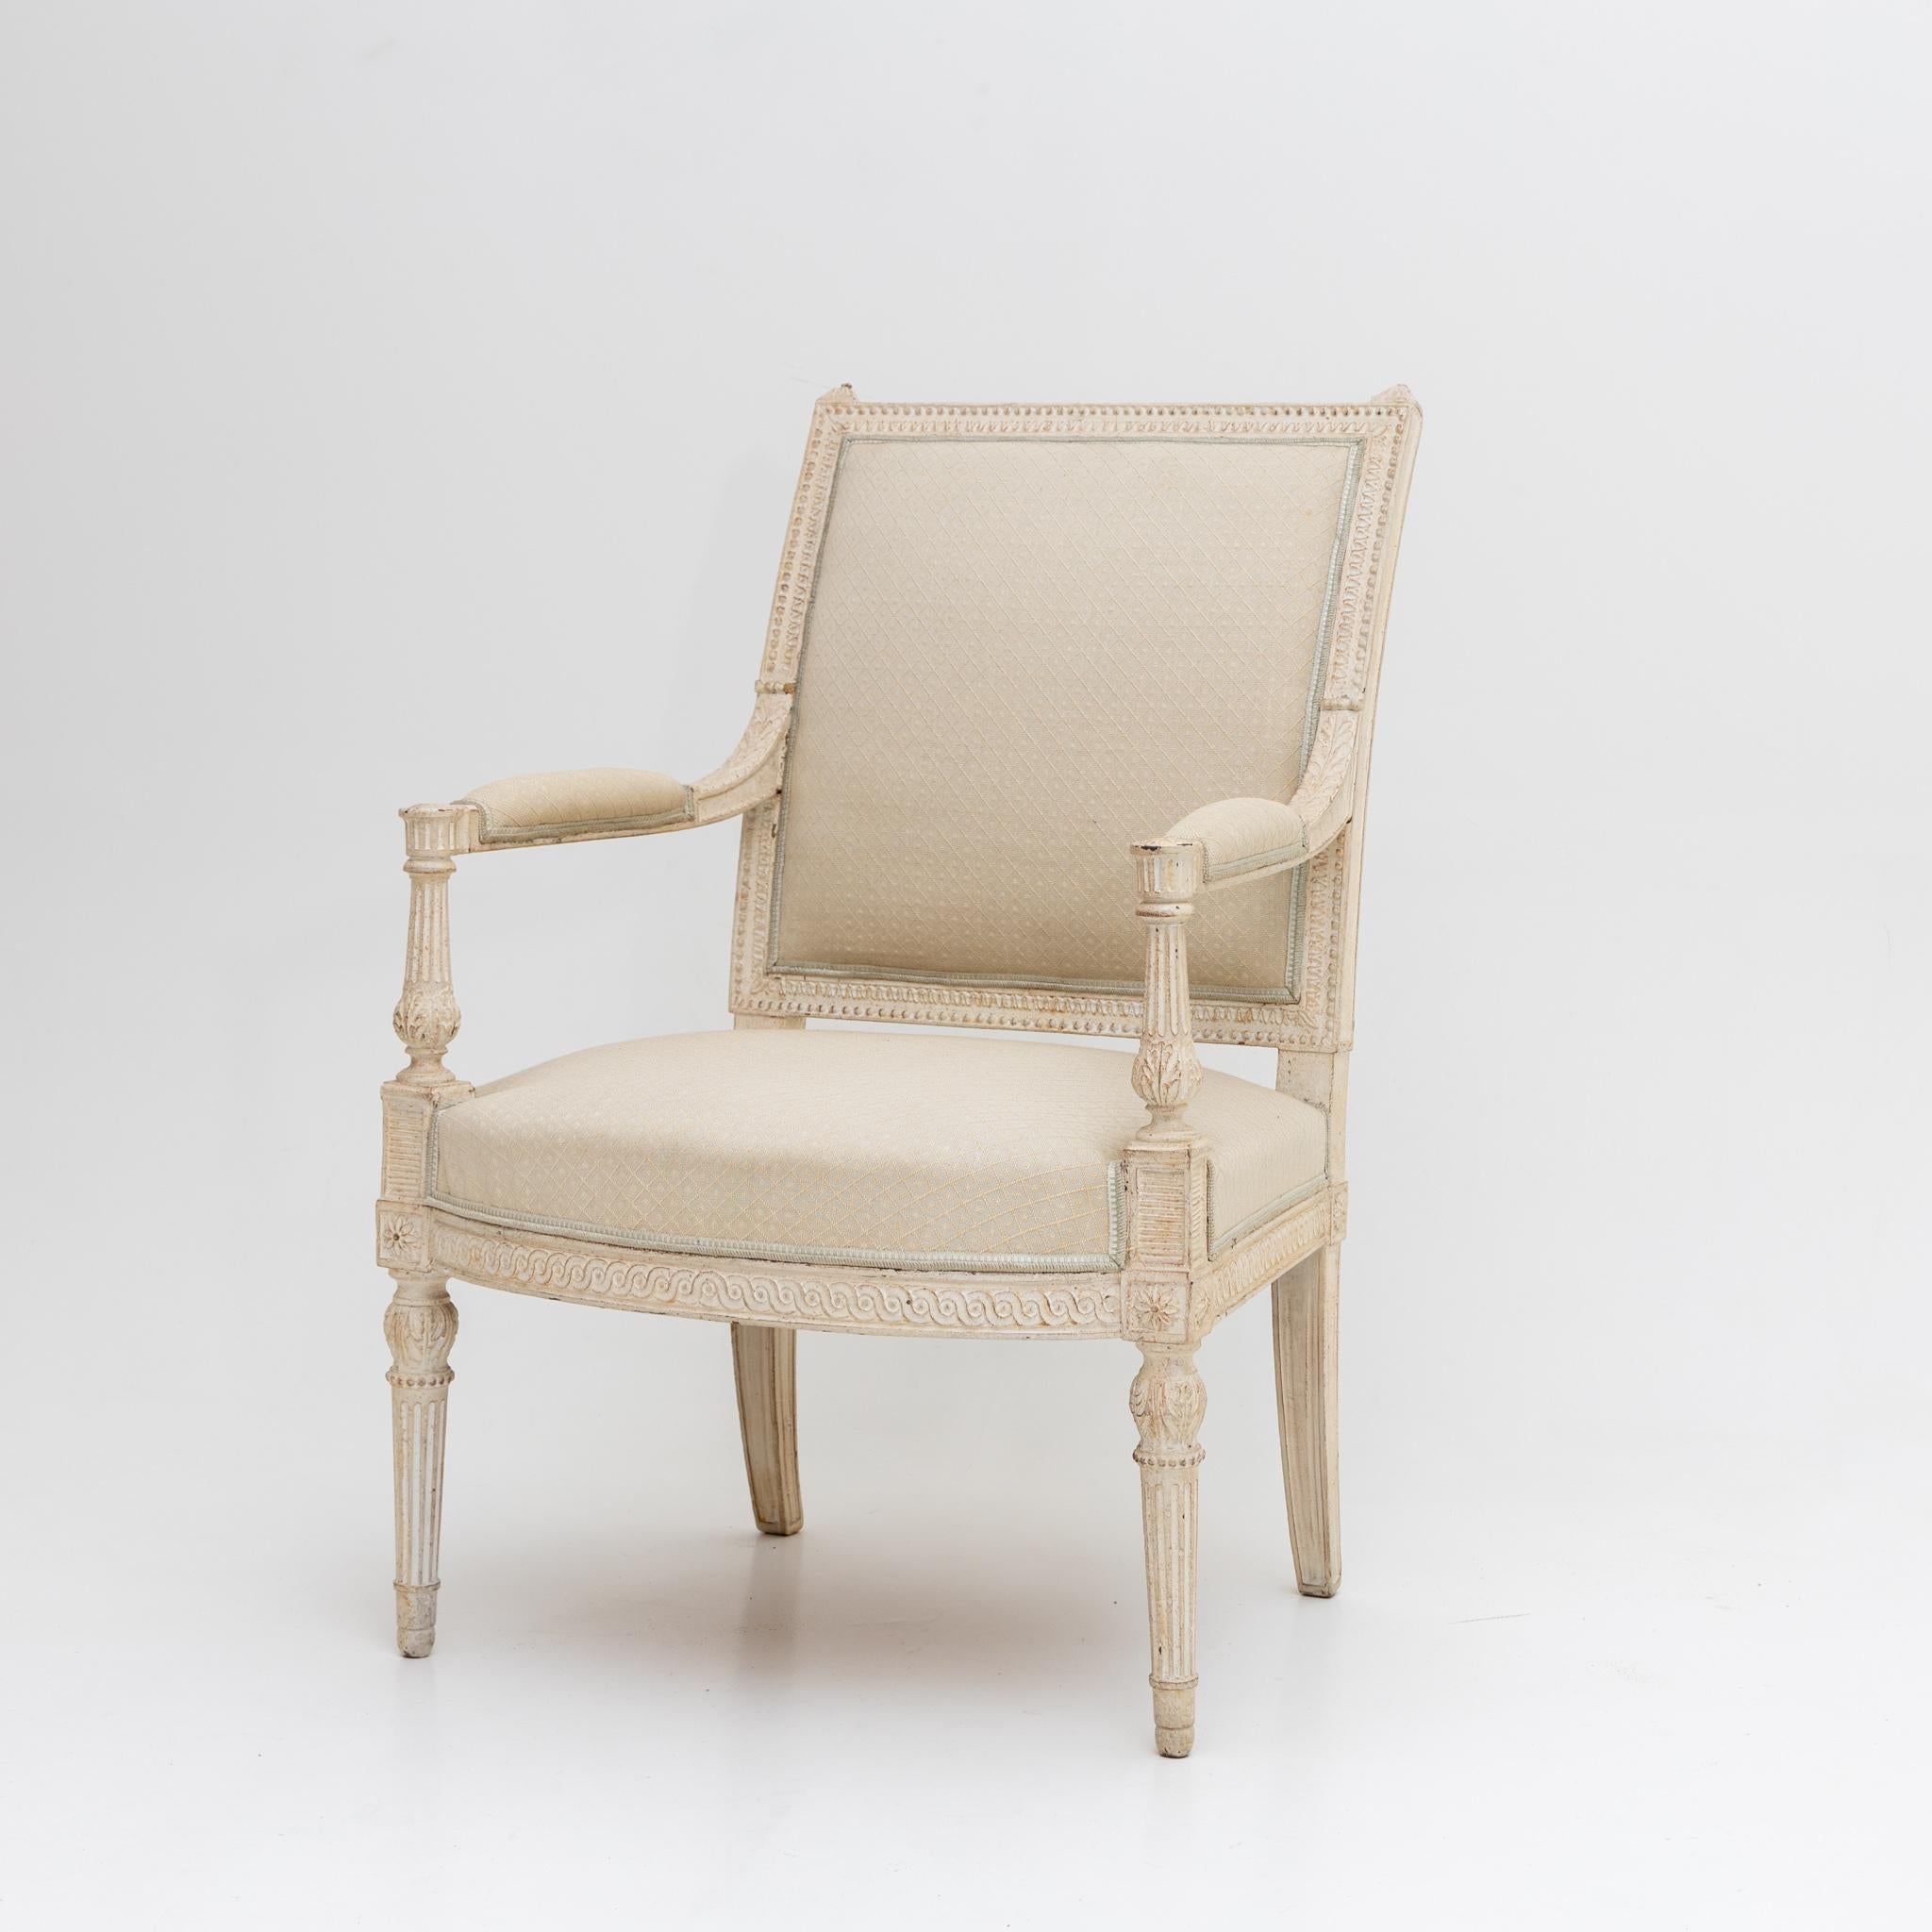 Louis Seize Armchairs and Sofas, Late 18th Century 3